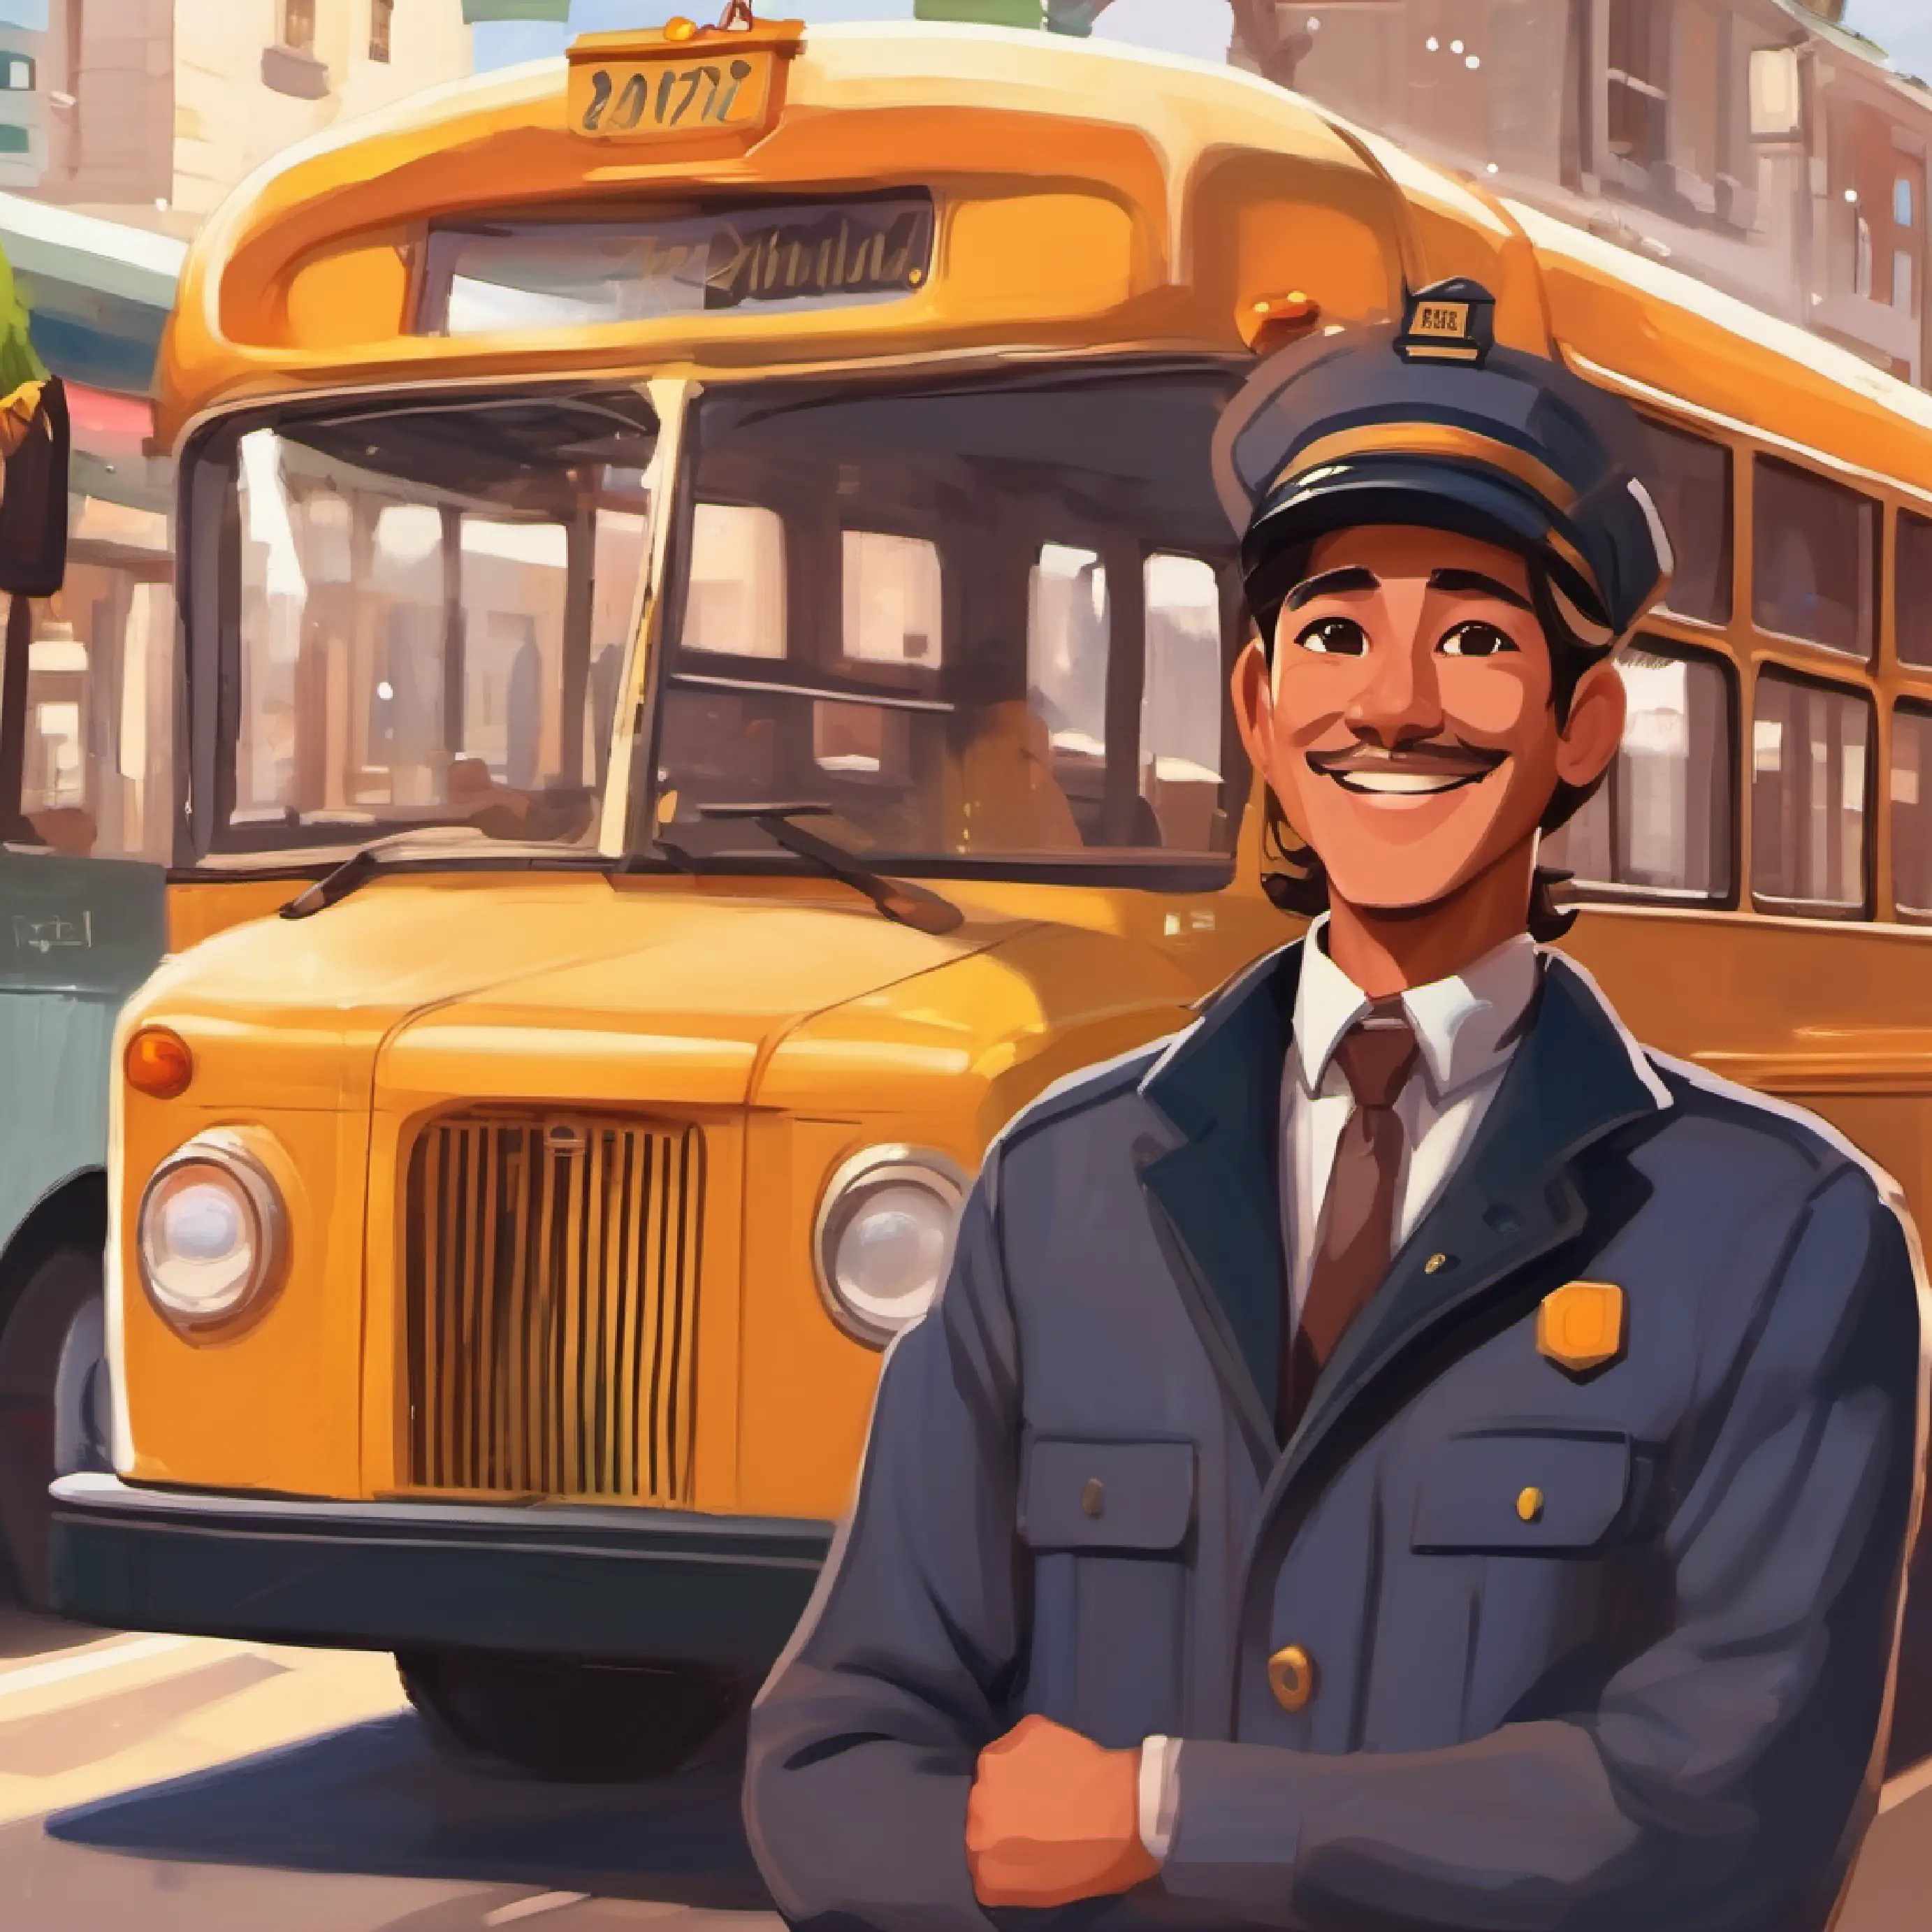 Introducing Warm smile, tan skin, brown eyes, bus driver cap, the friendly bus driver.